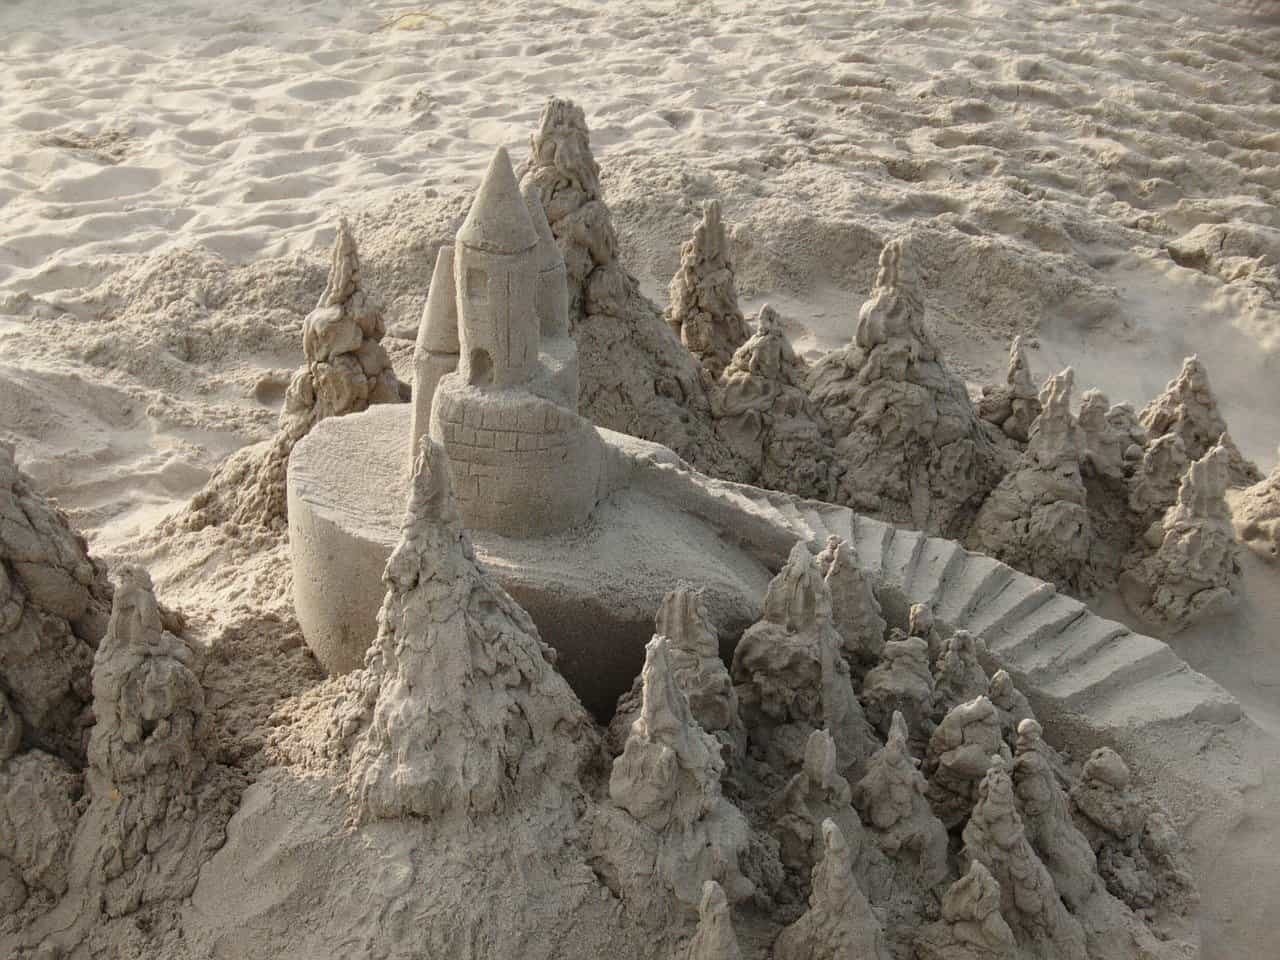 A close-up of a sandcastle on the beach.